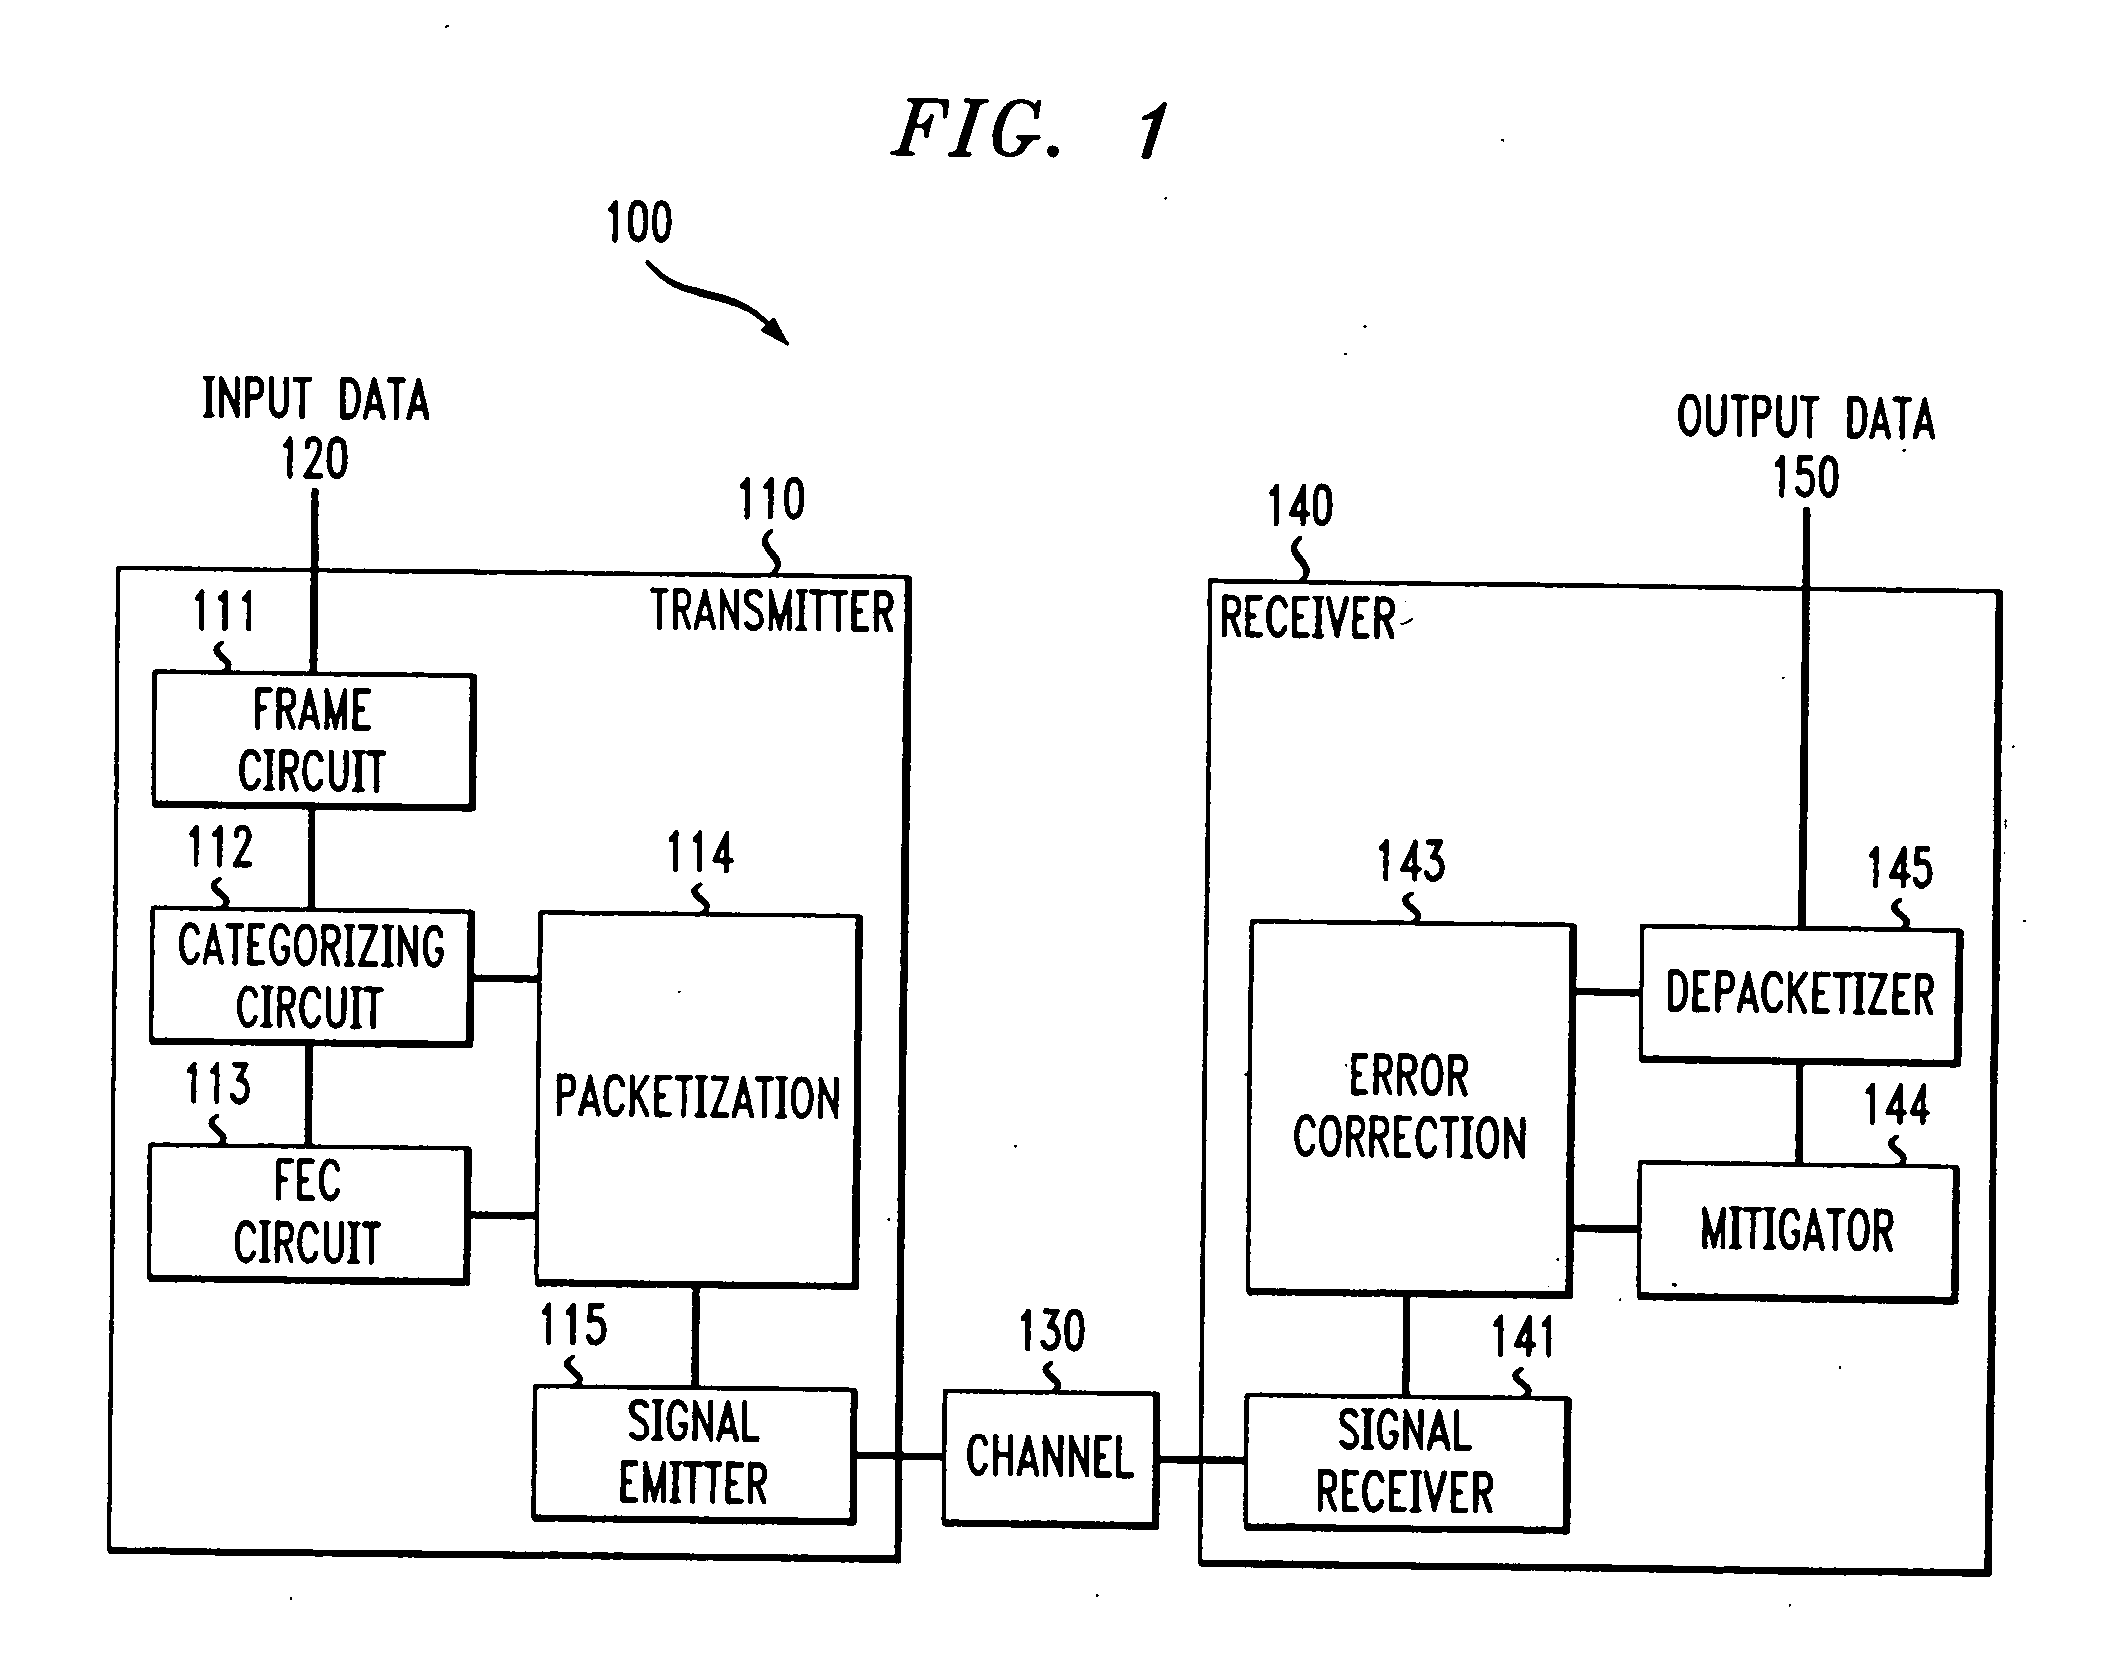 System and methods for transmitting data